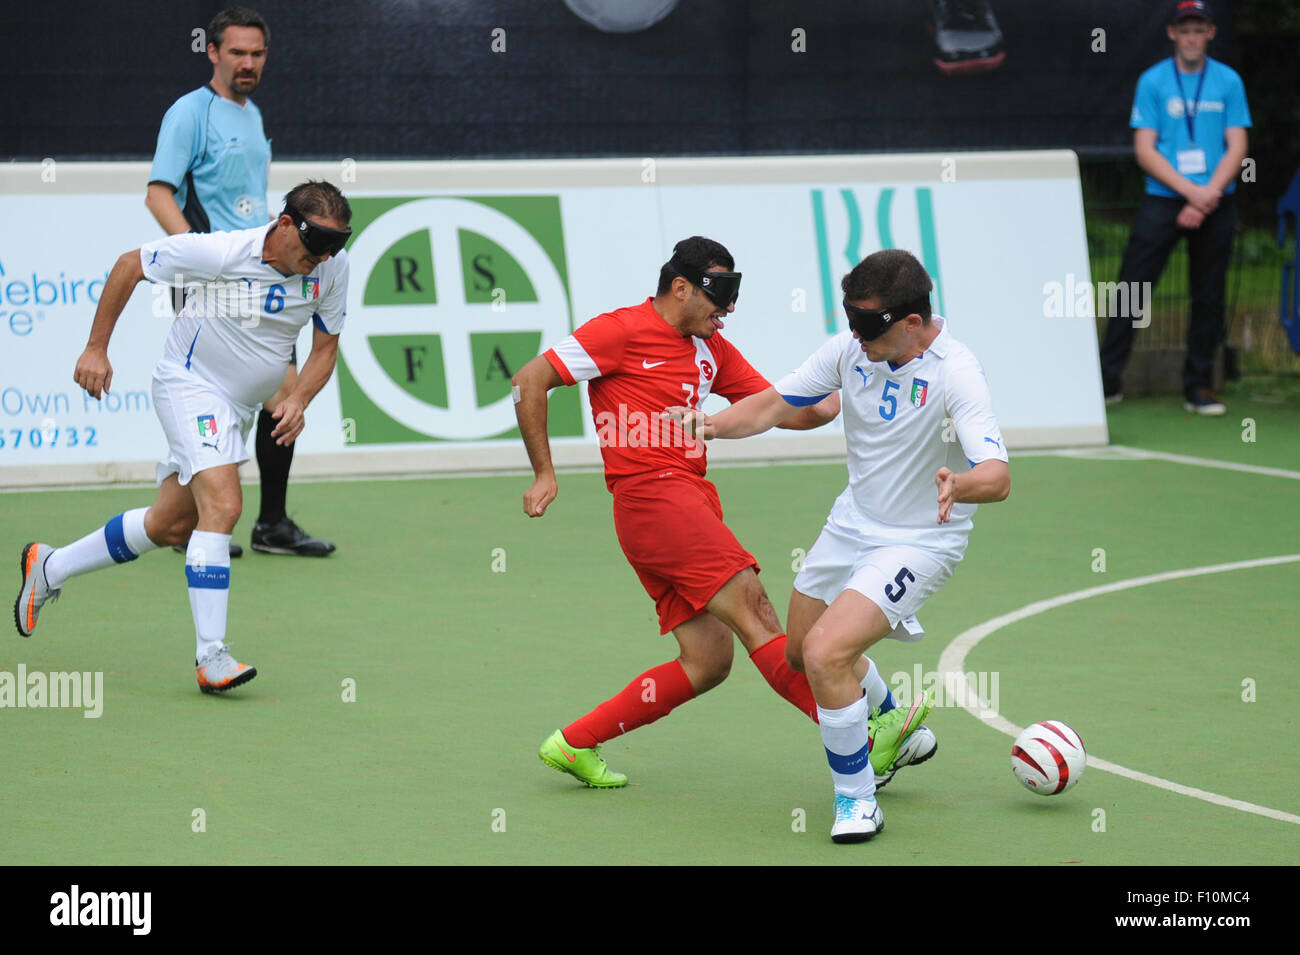 Hereford, UK. 24th Aug, 2015. IBSA Blind Football European Championships 2015 - Group A - Italy v Turkey. Point 4, Royal National College for the Blind, Hereford. 24th August 2015. Turkey's Emrah Ocal scores the game's opening goal. He is now the tournament’s leading goalscorer. Credit:  James Maggs/Alamy Live News Stock Photo